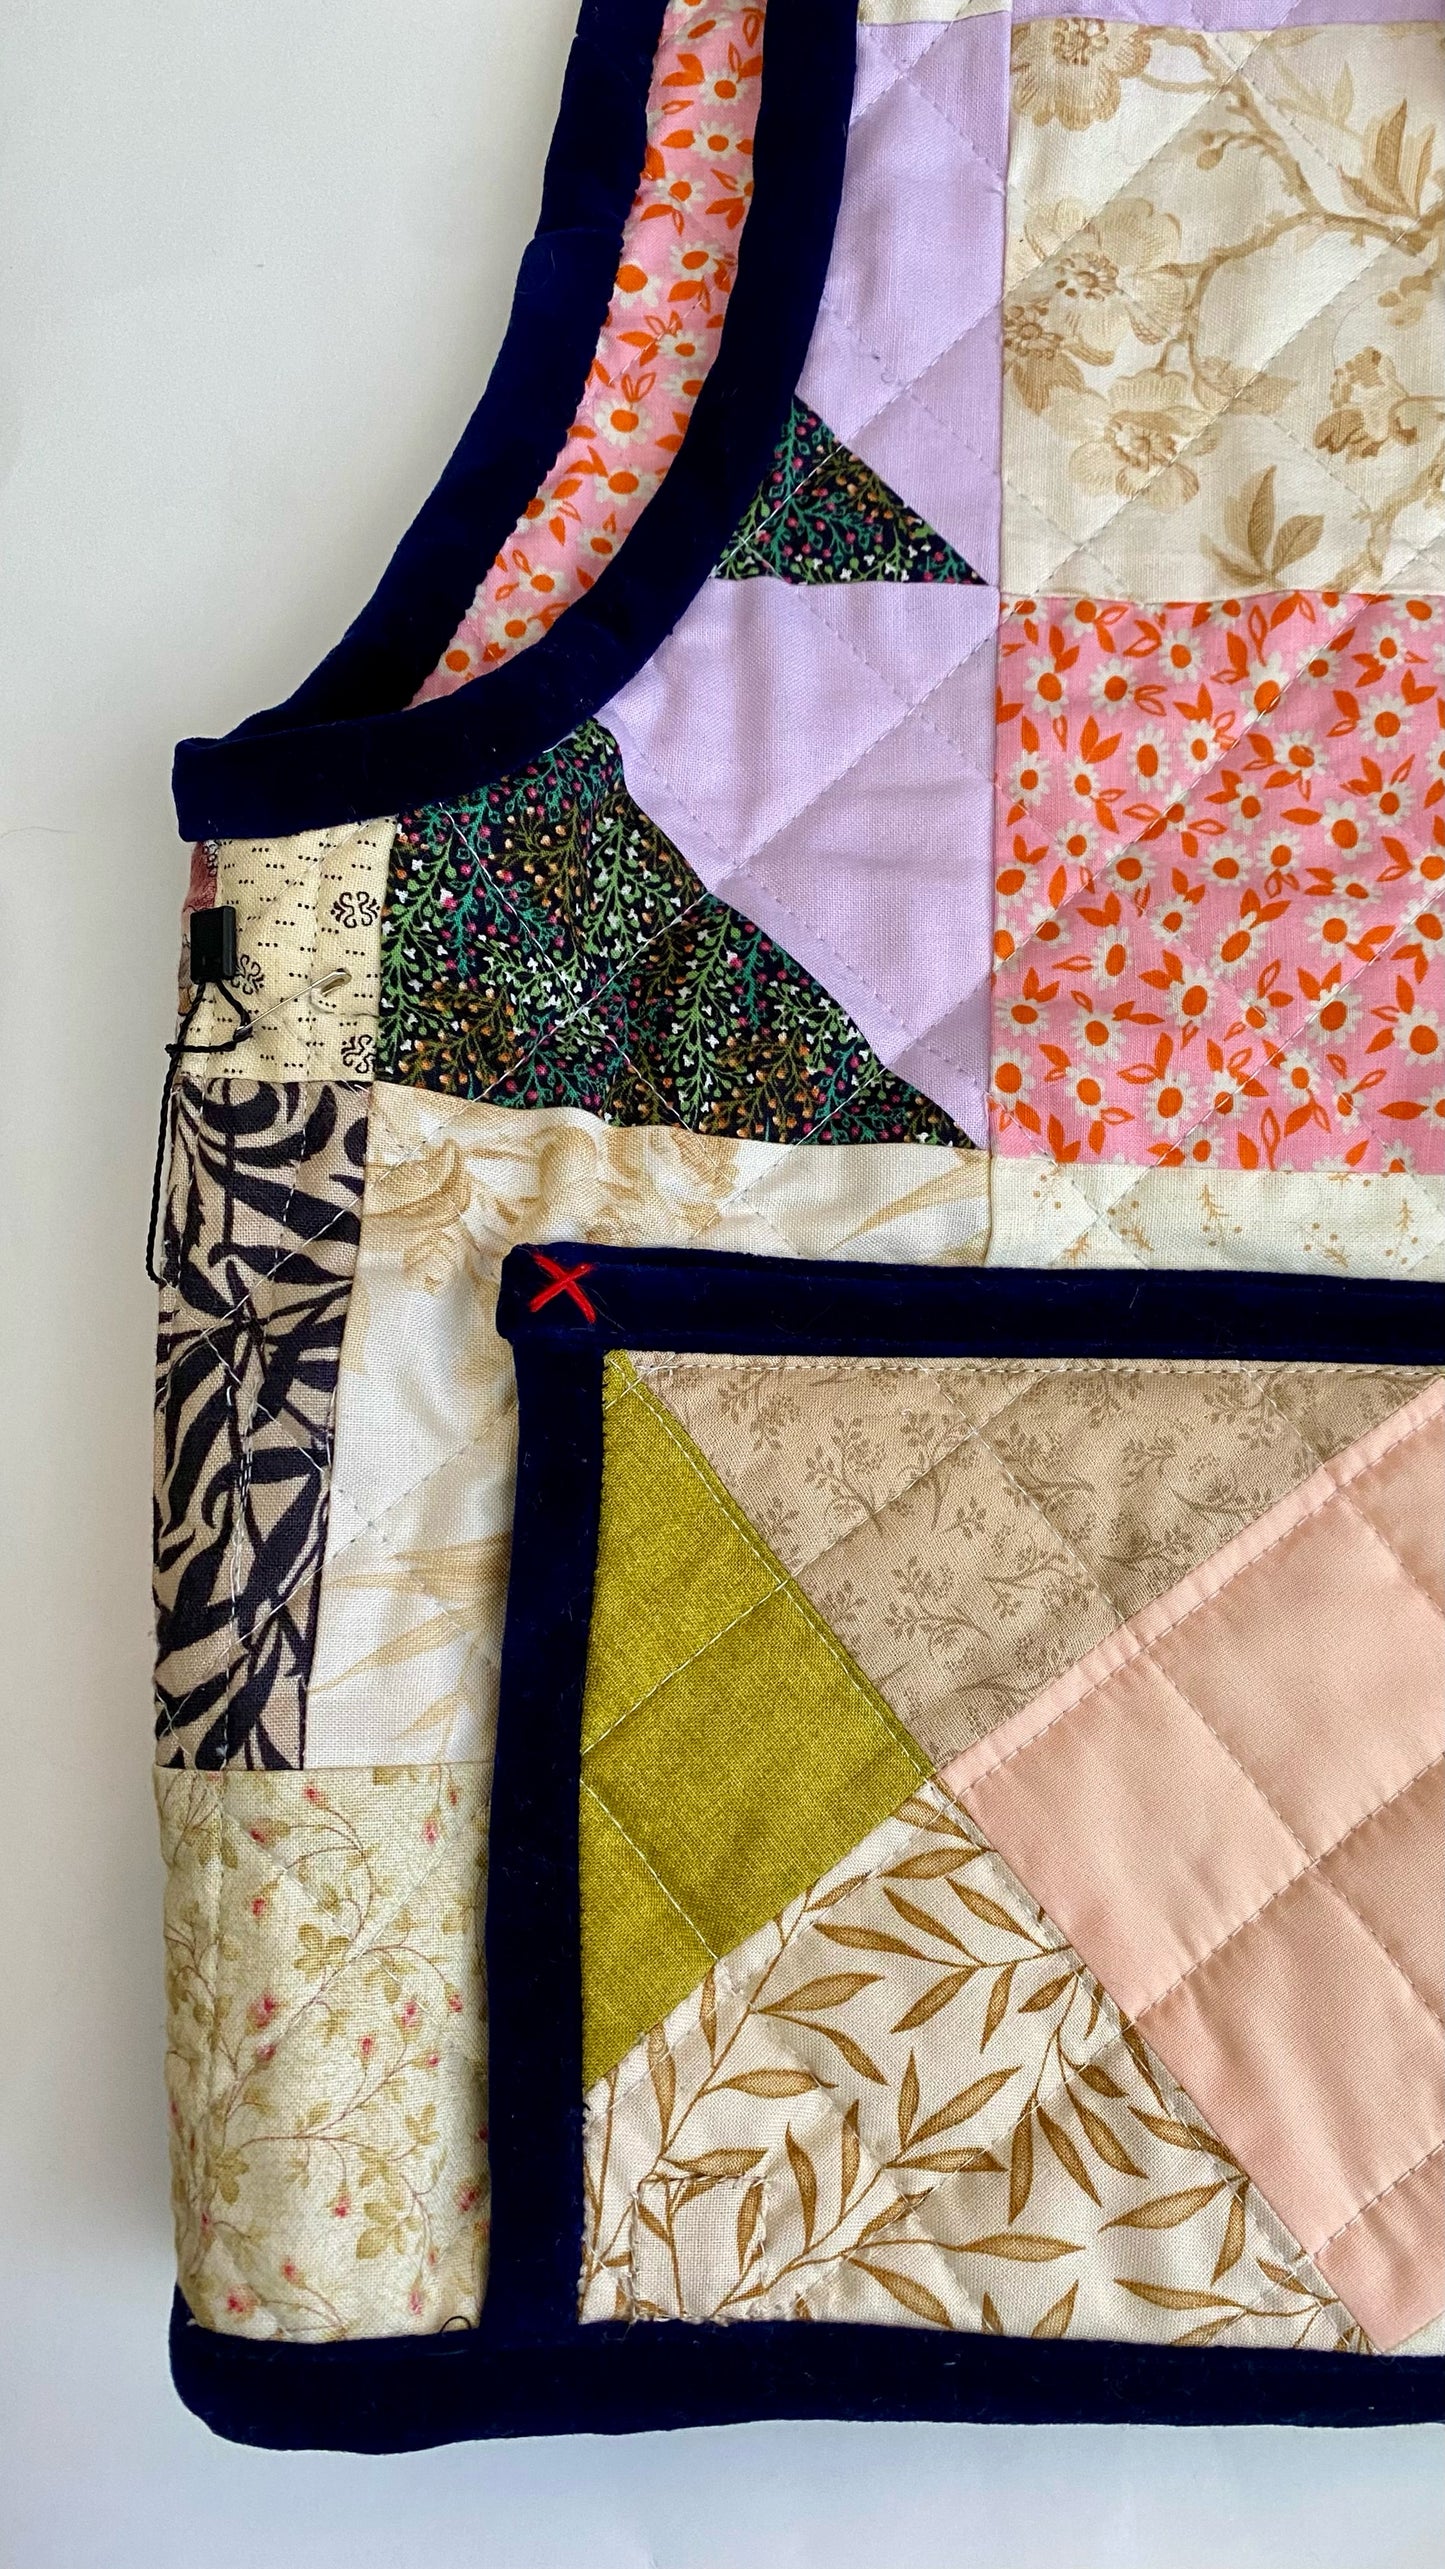 Spring Blossom Quilted Vest - Prototype